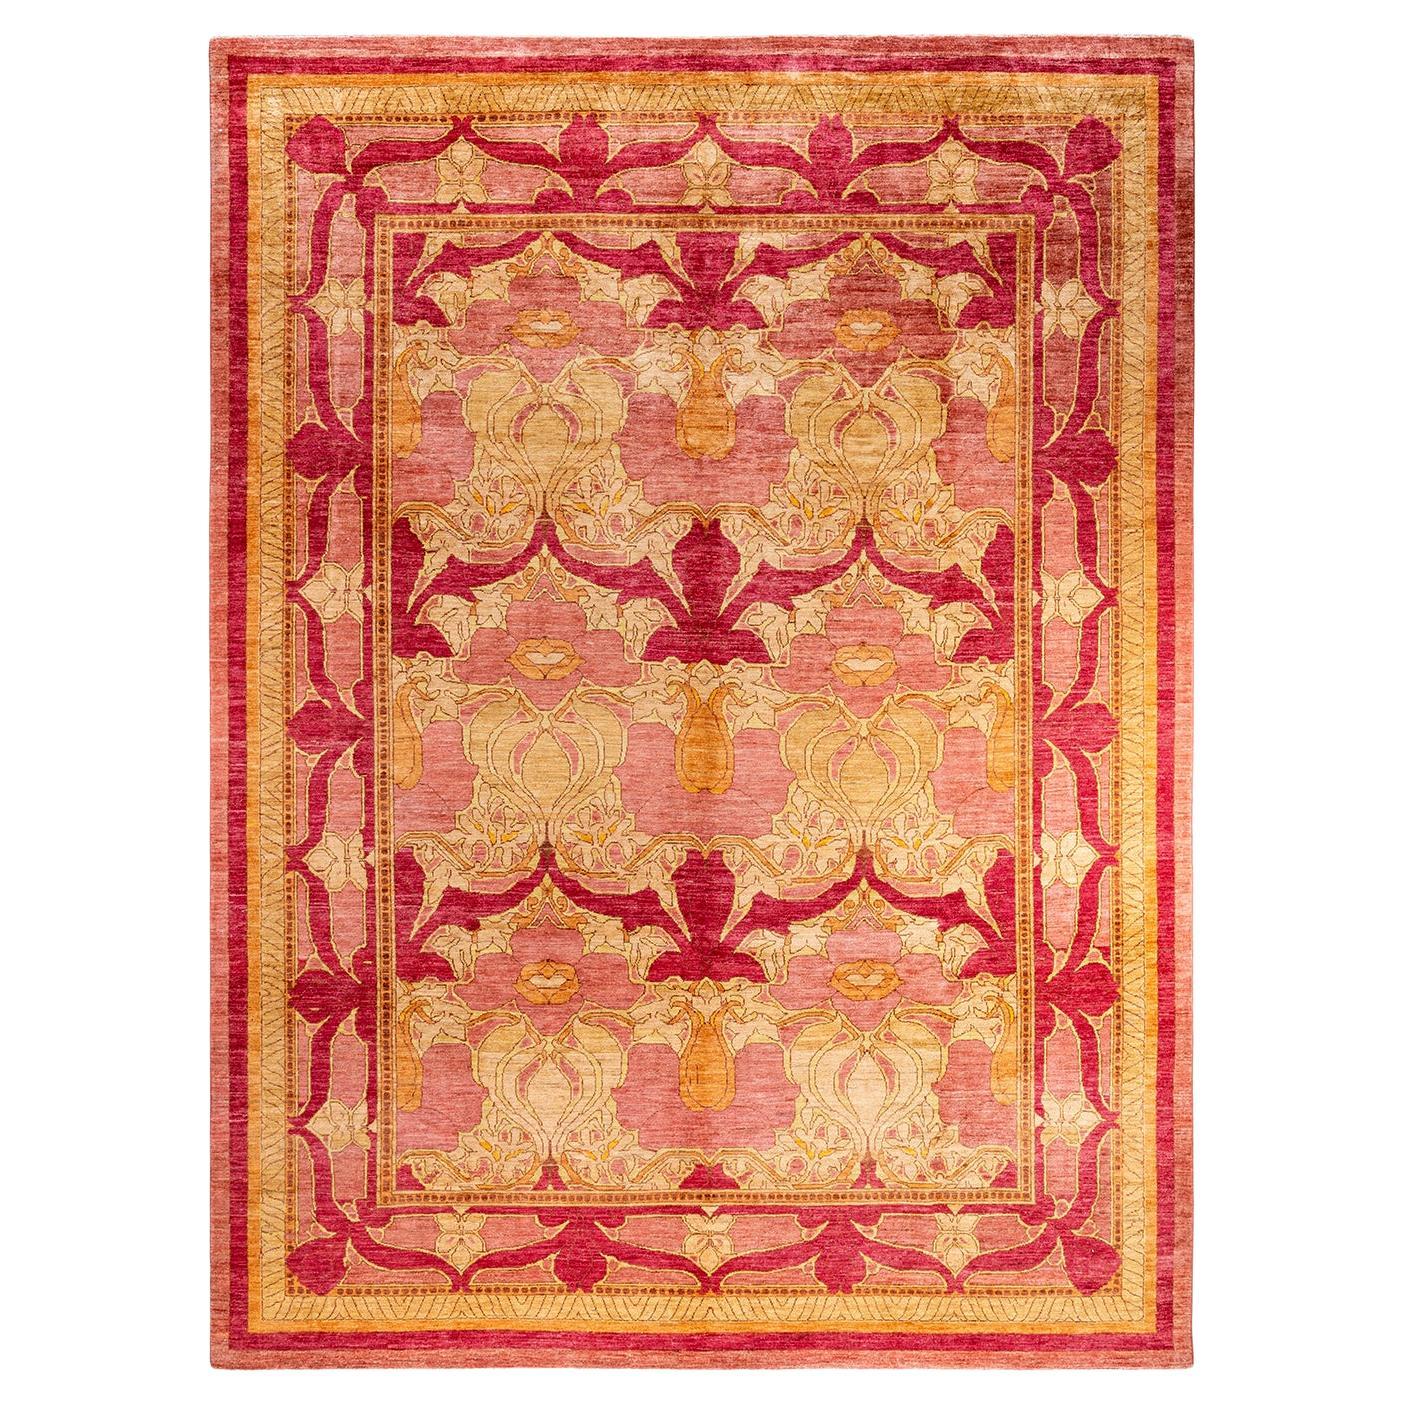 Contemporary Arts & Crafts Hand Knotted Wool Pink Area Rug  im Angebot